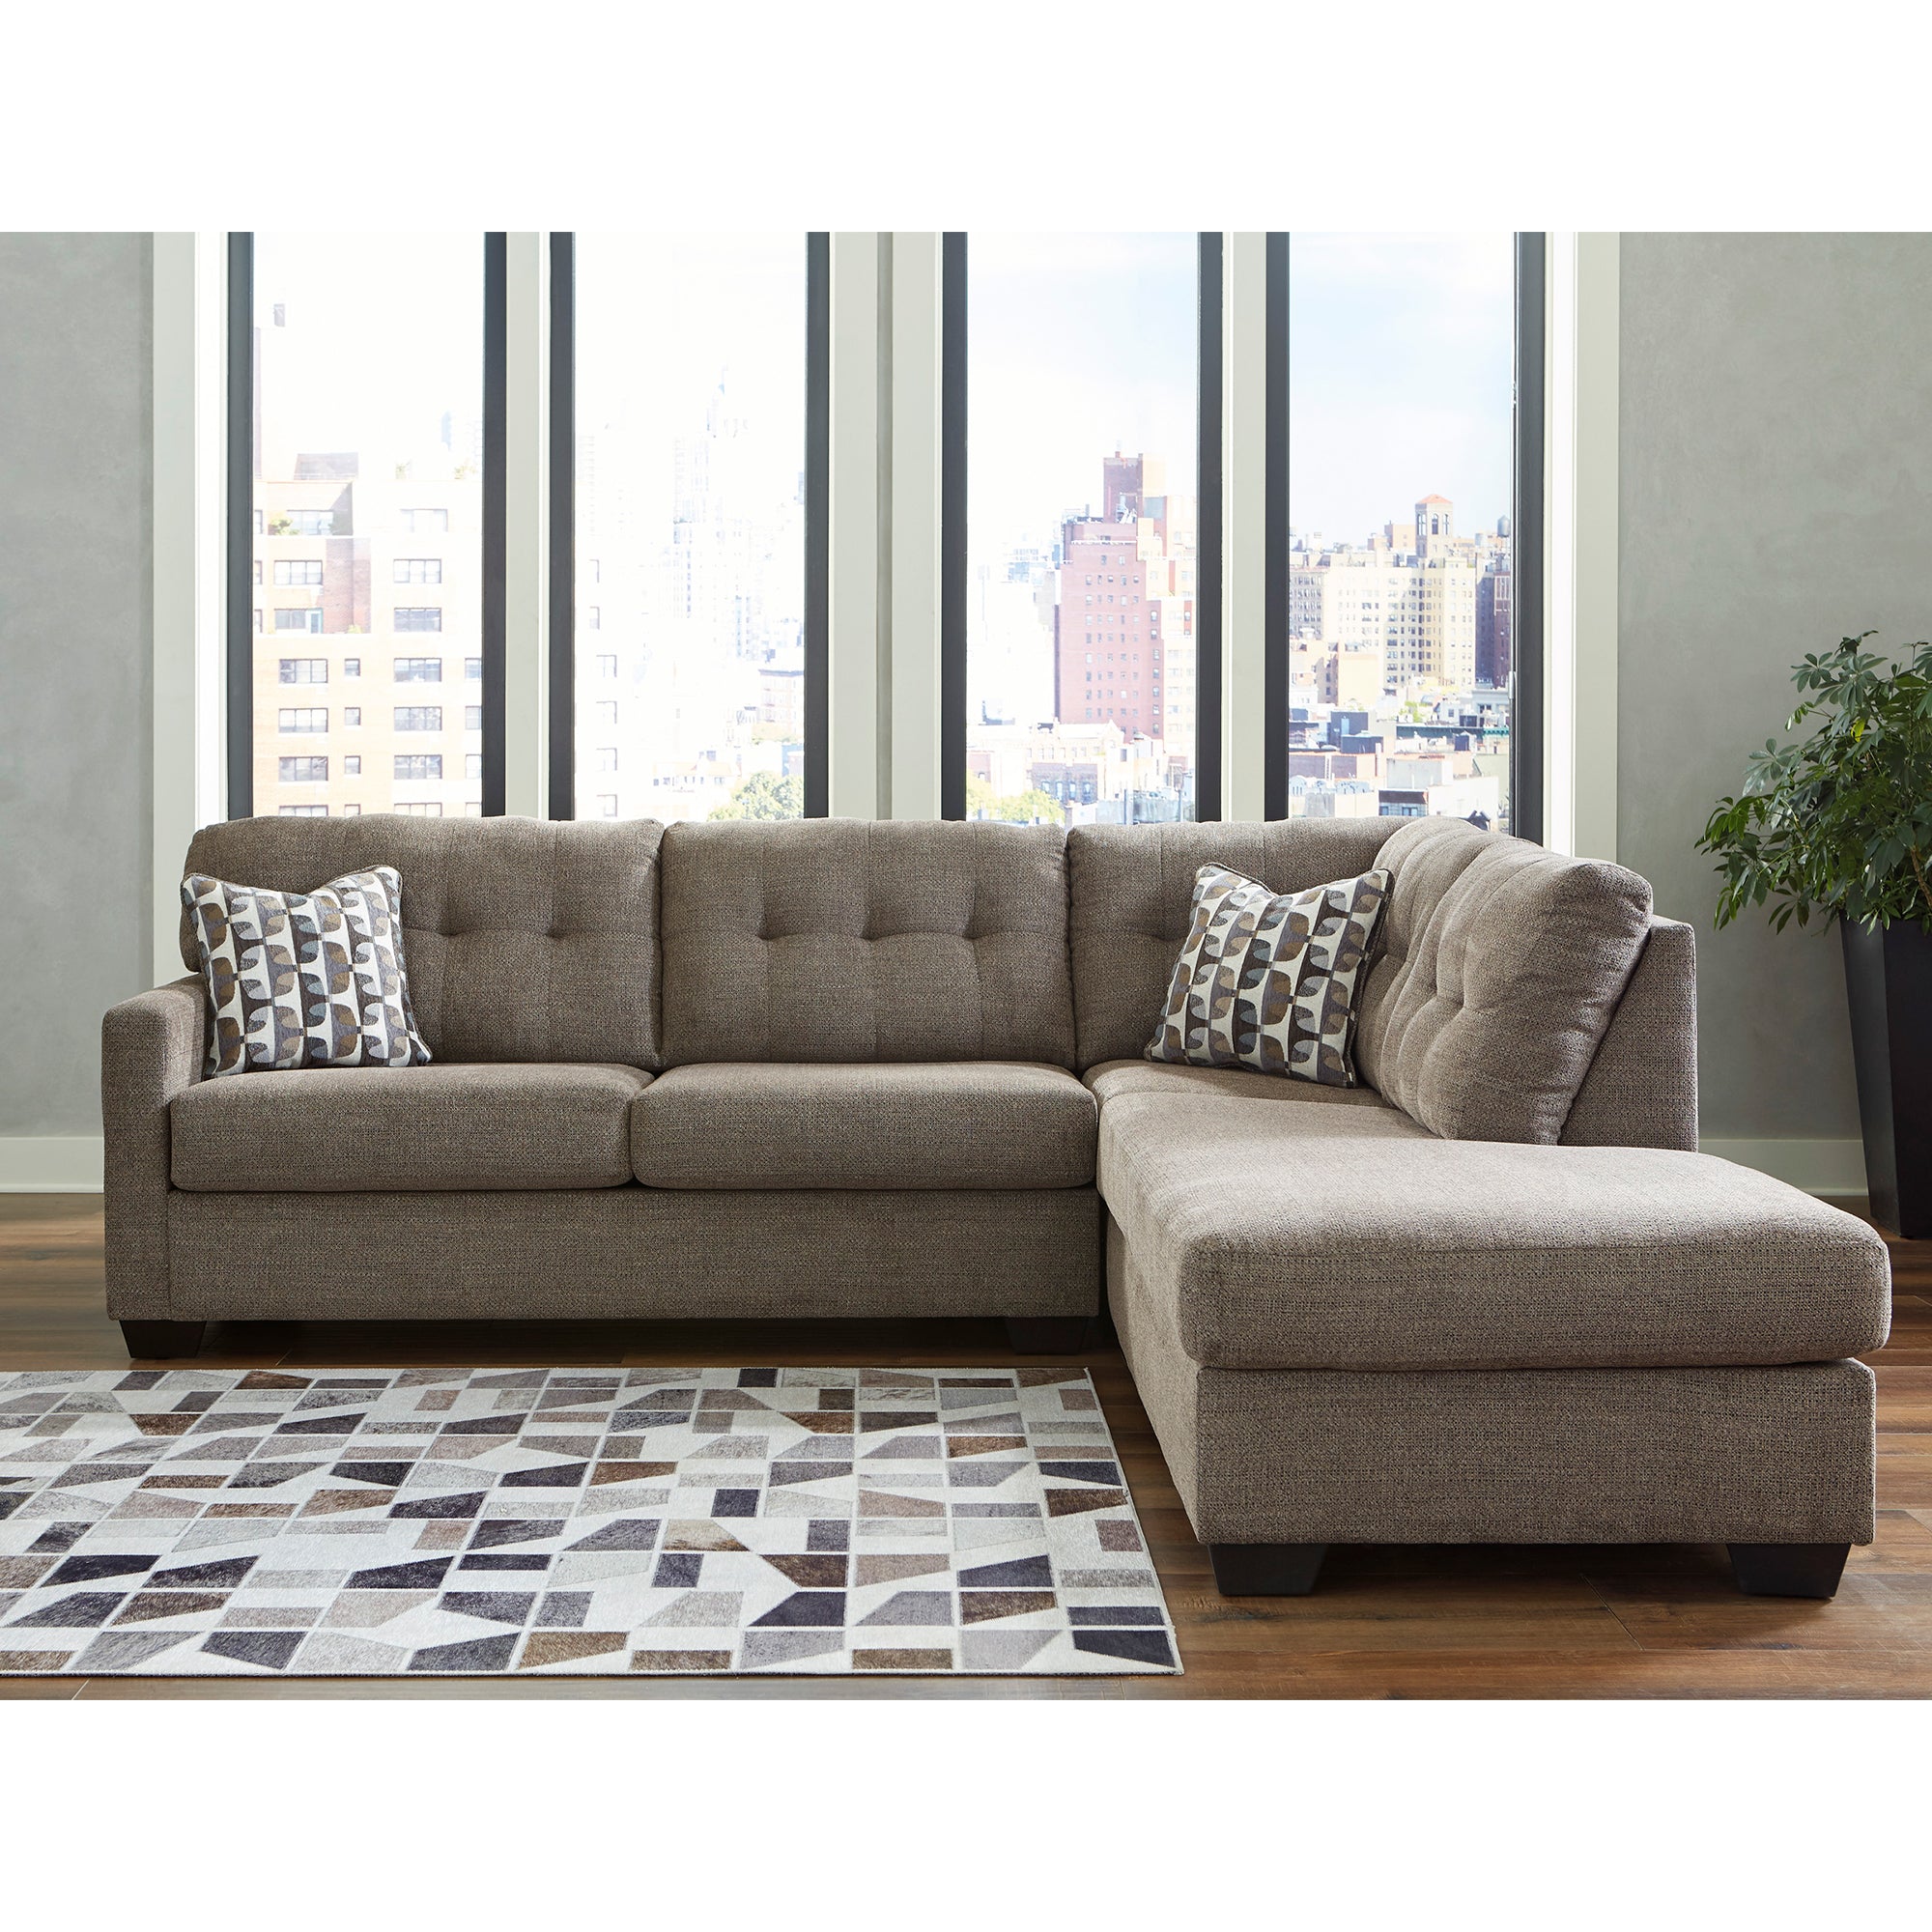 Luxurious chocolate-colored Mahoney Sectional with chaise, perfect for cozy evenings at home